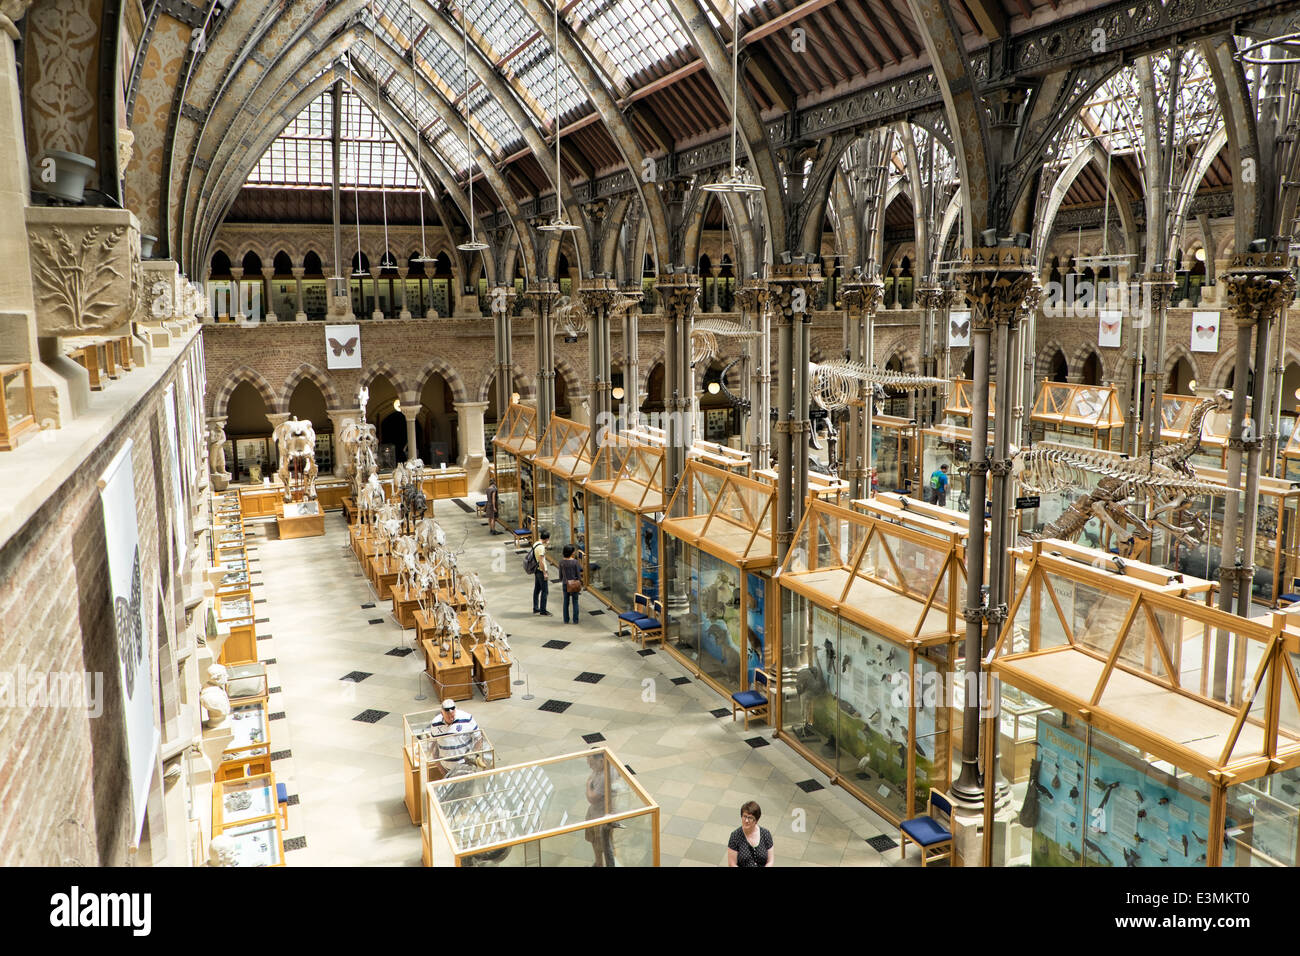 The interior of the natural history museum in Oxford, Oxfordshire, UK showing visitors, exhibits & the Victorian architecture. Stock Photo